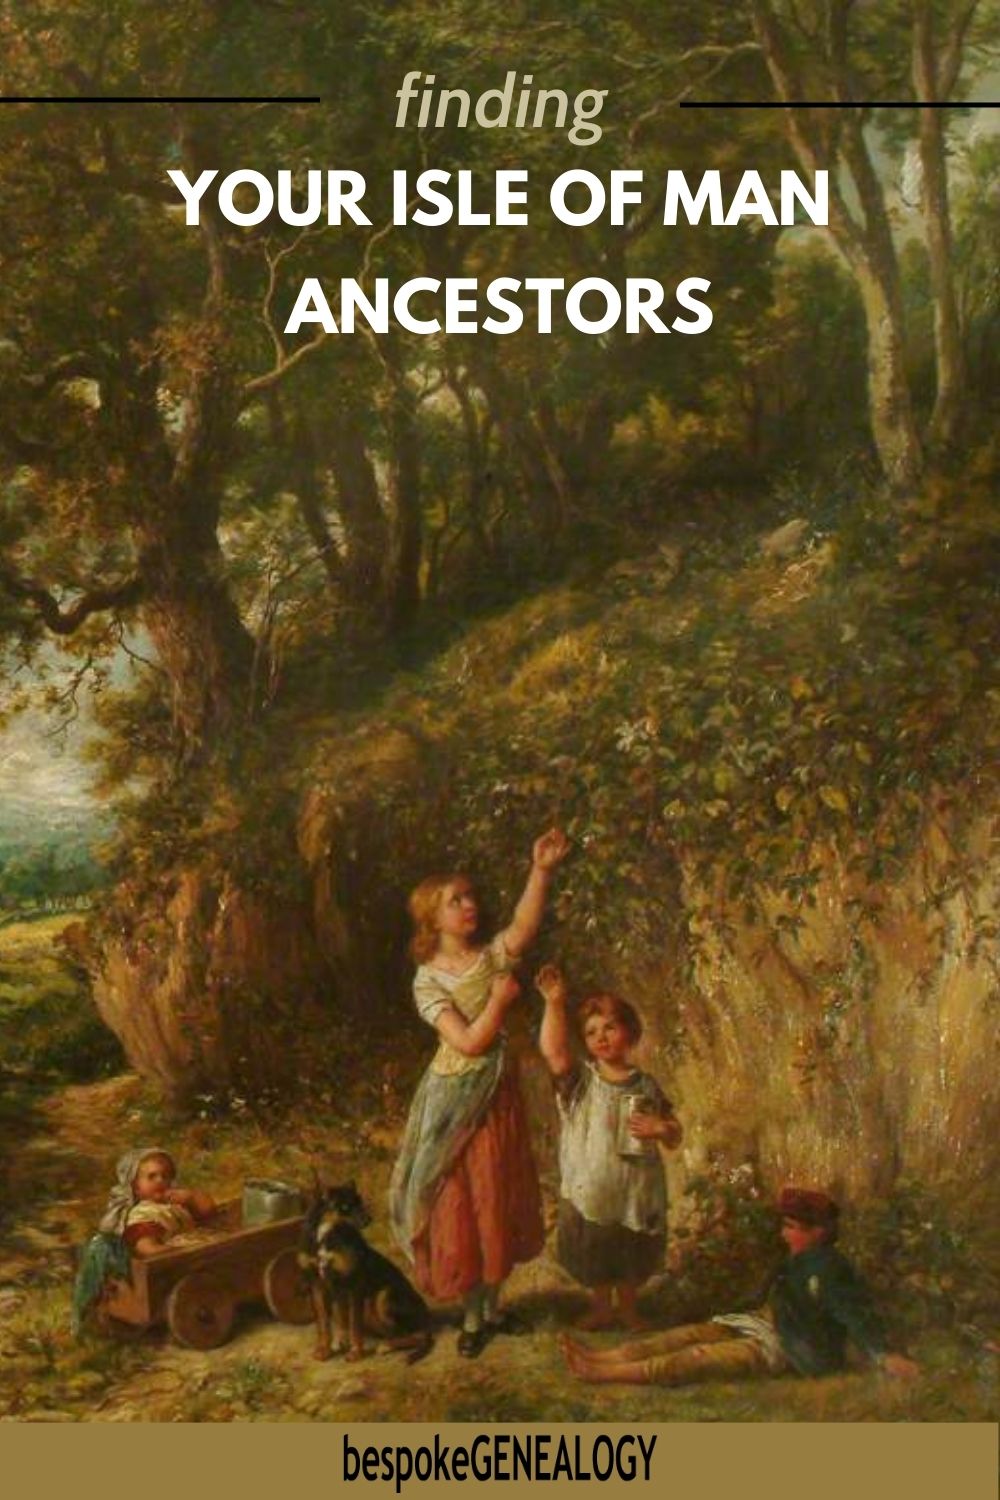 Pinterest pin. Finding your Isle of Man Ancestors. 19th century oil painting of children in the Isle of Man countryside